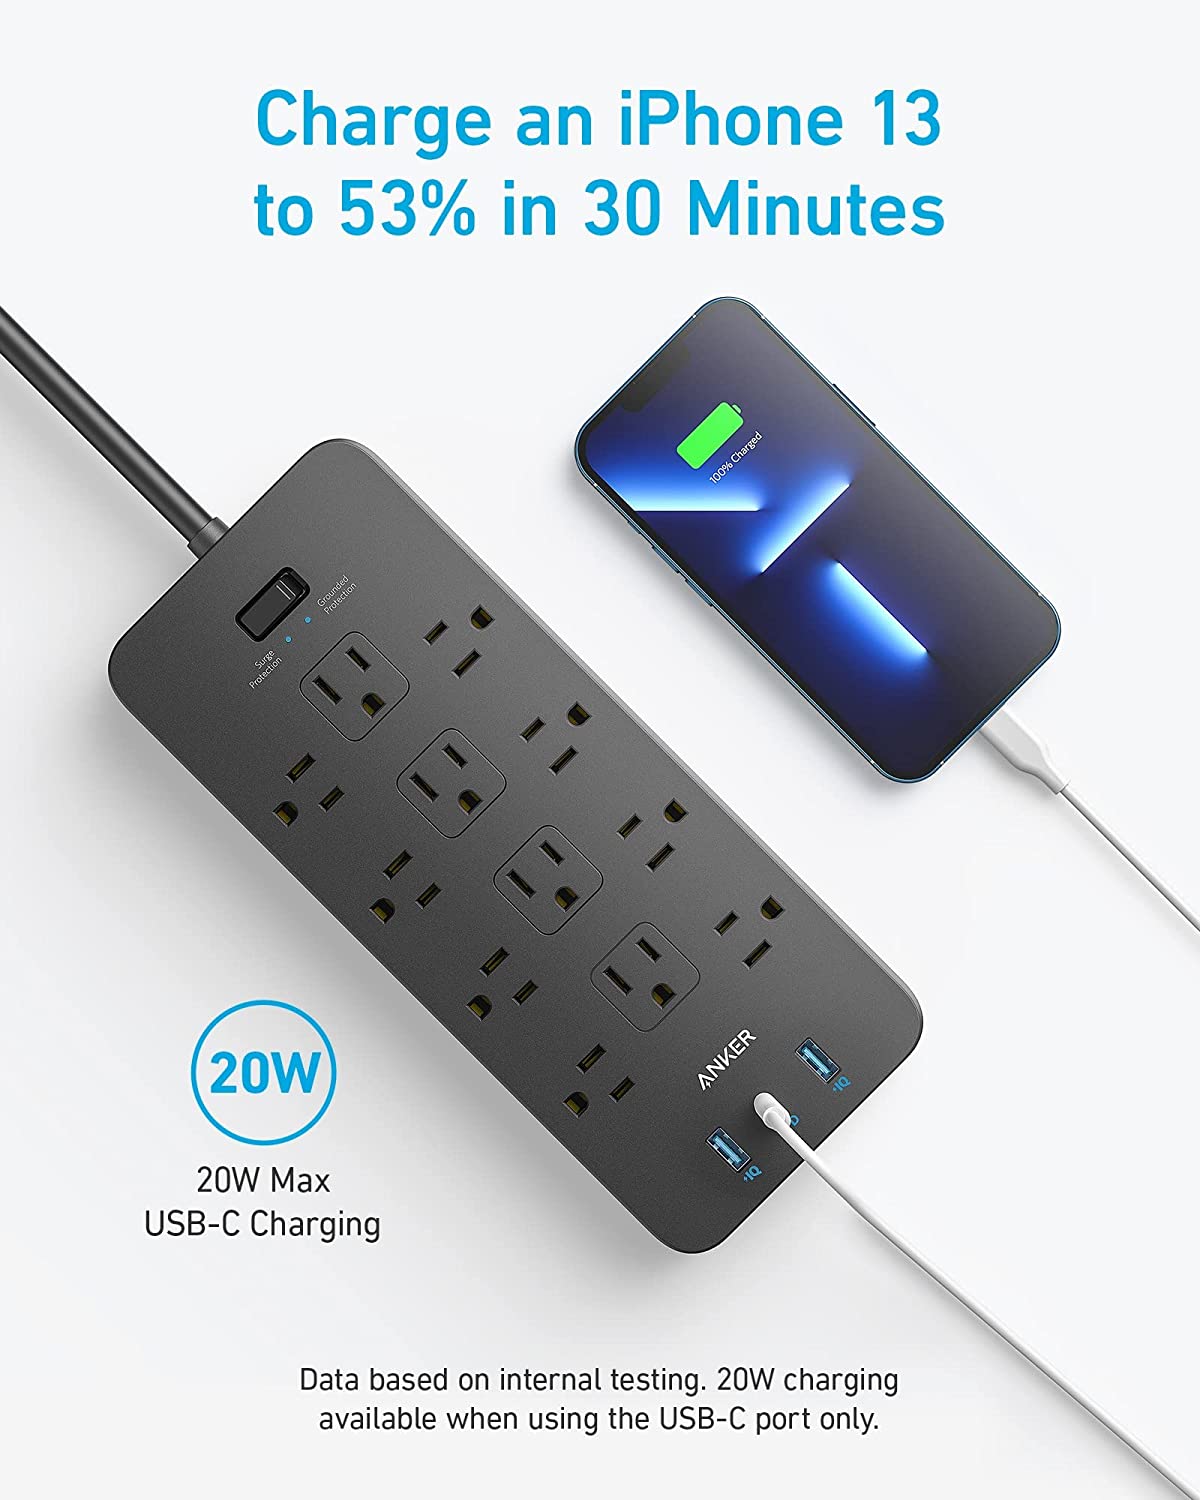 Anker Power Strip Surge Protector (2100J), 12 Outlets with 2 USB A and 1 USB C Port